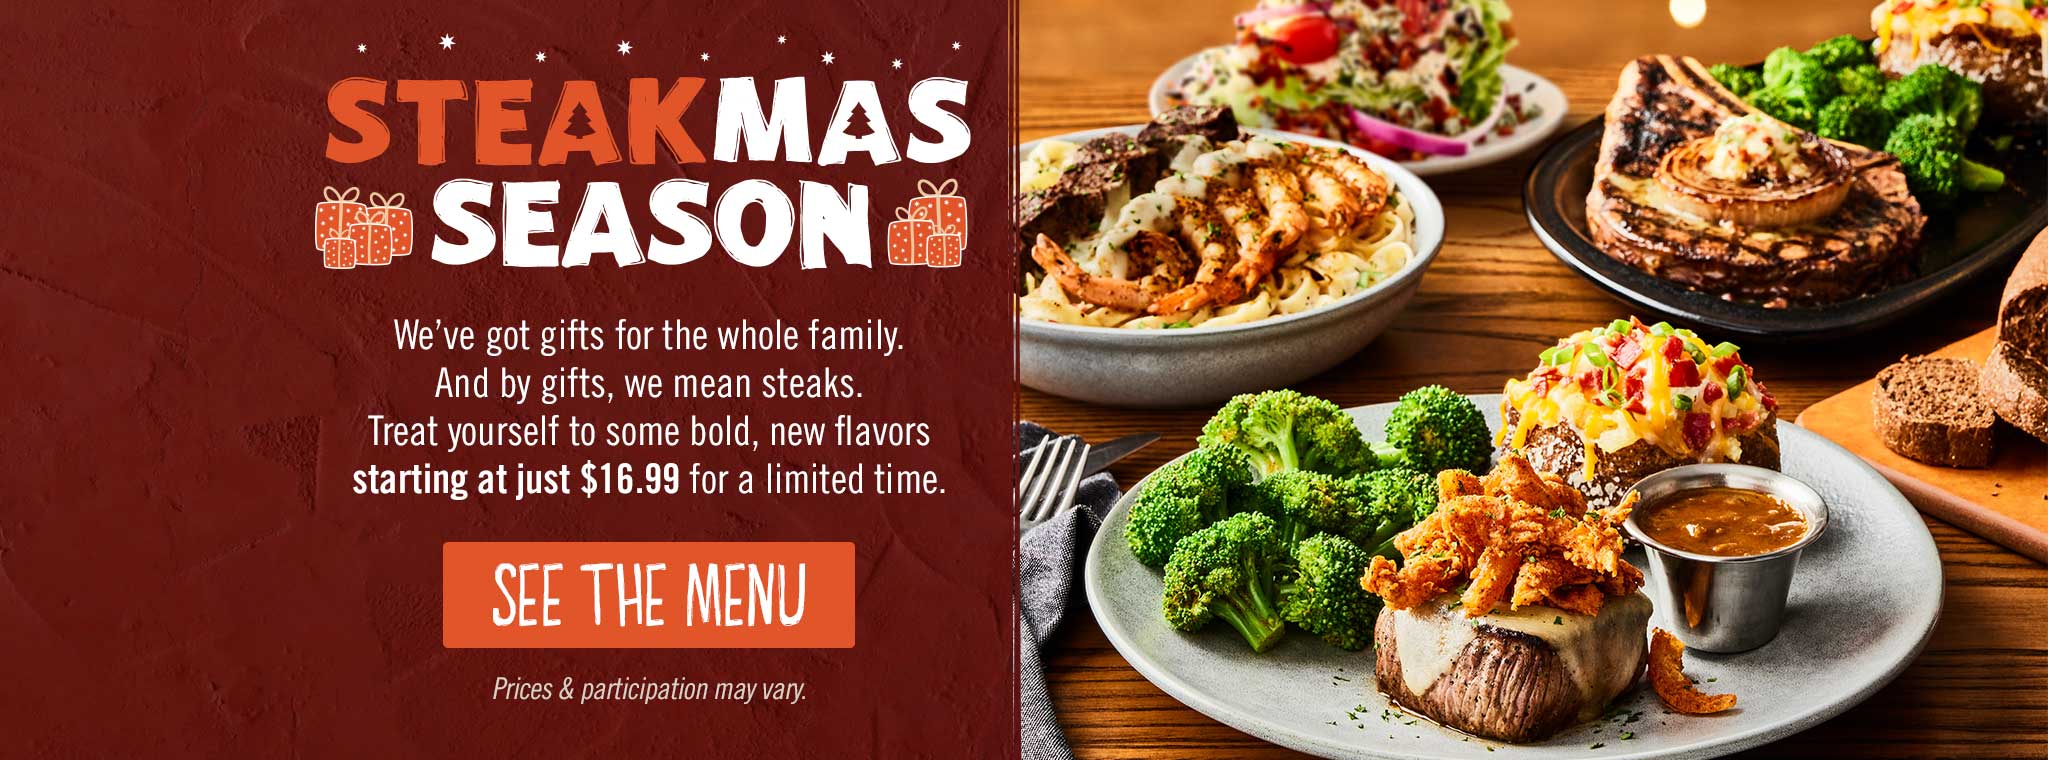 SteakMas Season. We've got gifts for the whole family. And by gifts, we mean steaks. Treat yourself to some bold, new flavors starting at just $16.99 for a limited time. SEE THE MENU. Price & participation may vary. 